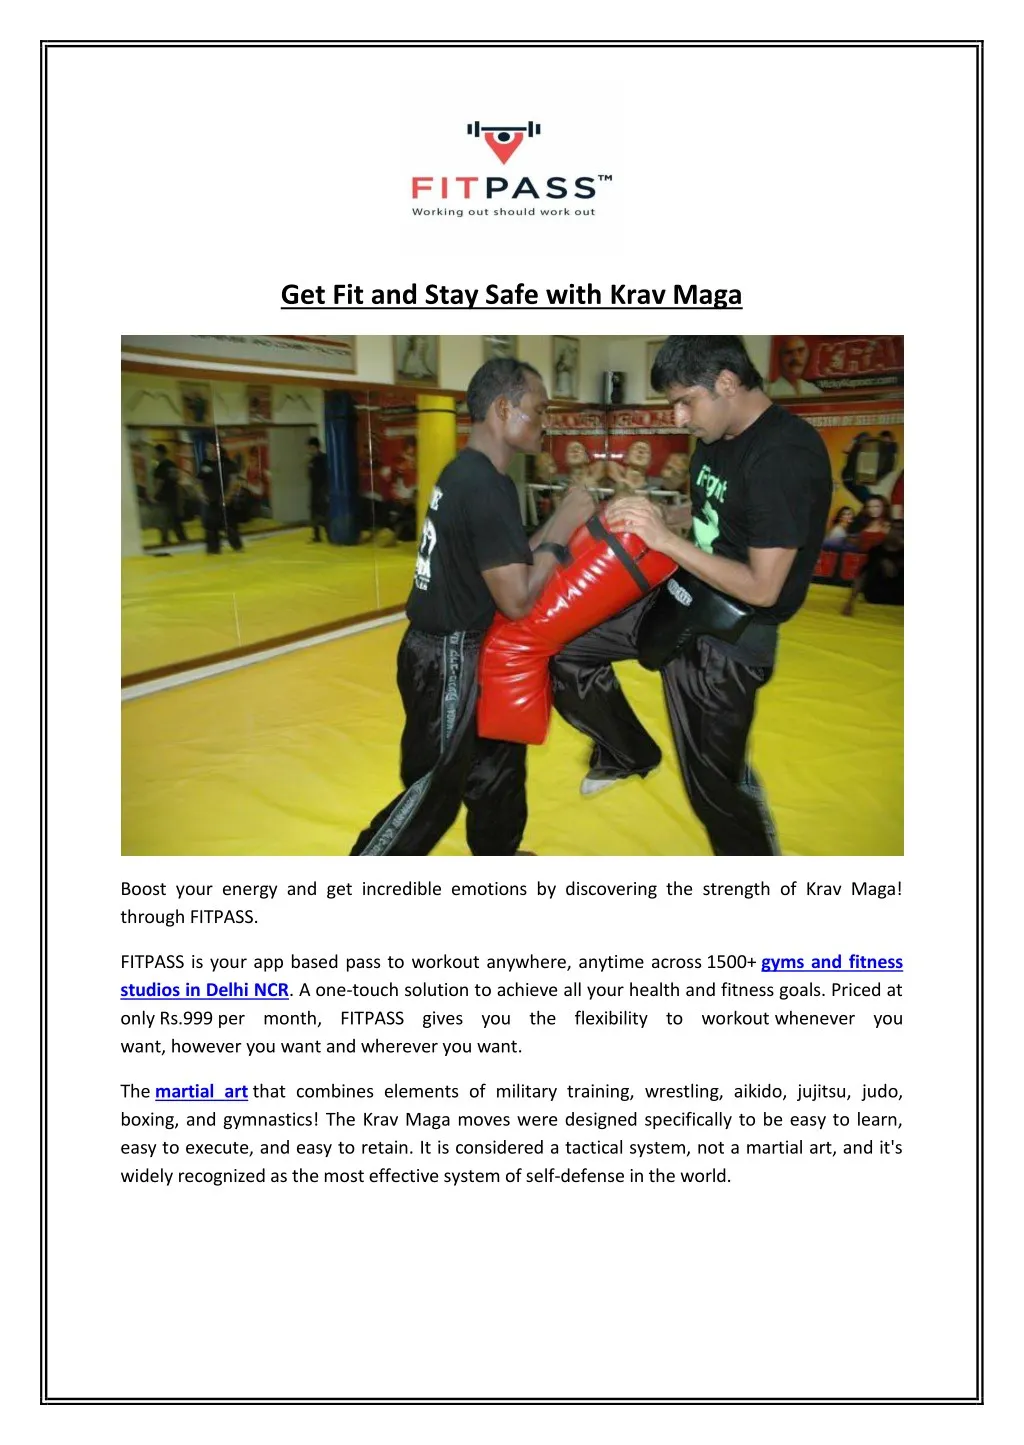 get fit and stay safe with krav maga